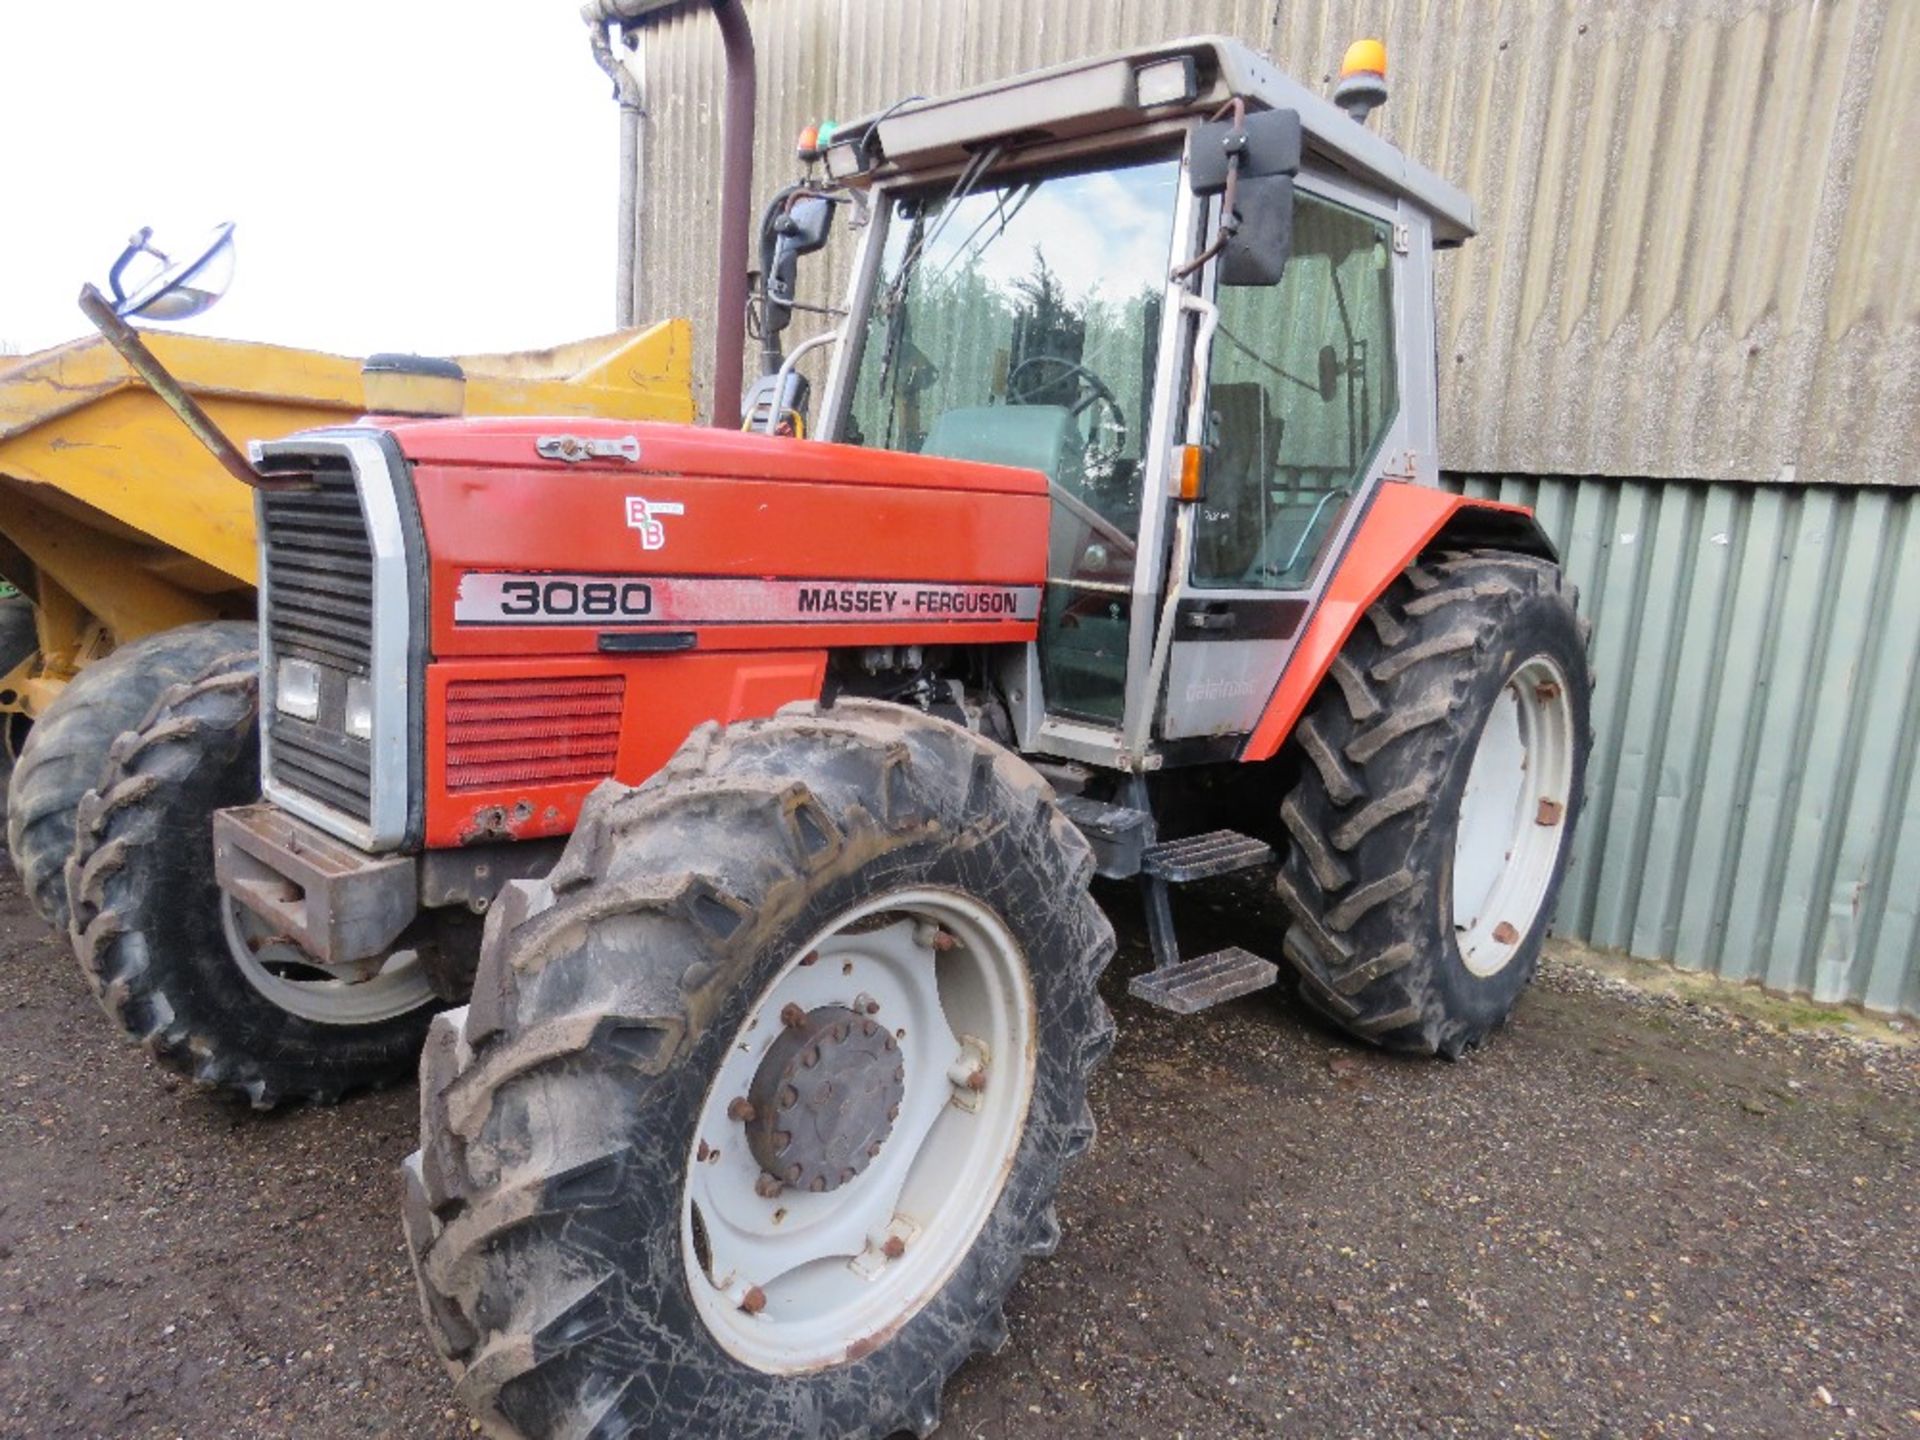 MASSEY FERGUSON 3080 4WD TRACTOR REG:H786 LFA (V5 TO APPLY FOR), 7165 REC HOURS. WHEN TESTED THIS M - Image 10 of 11